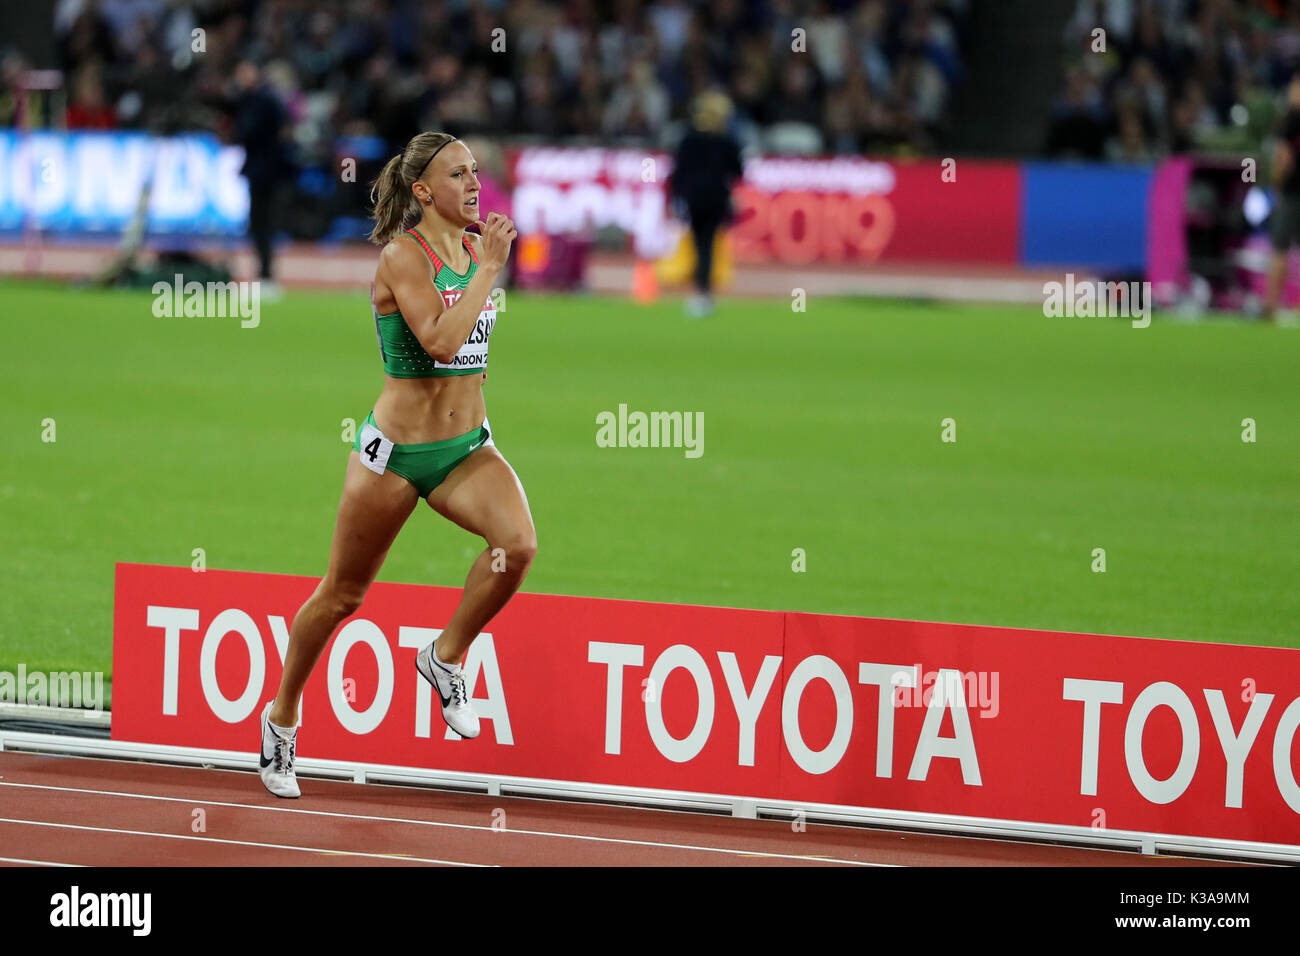 Xénia KRIZSÁN (Hungary) competing in the Heptathlon 800m Heat 2 at the 2017, IAAF World Championships, Queen Elizabeth Olympic Park, Stratford, London, UK. Stock Photo